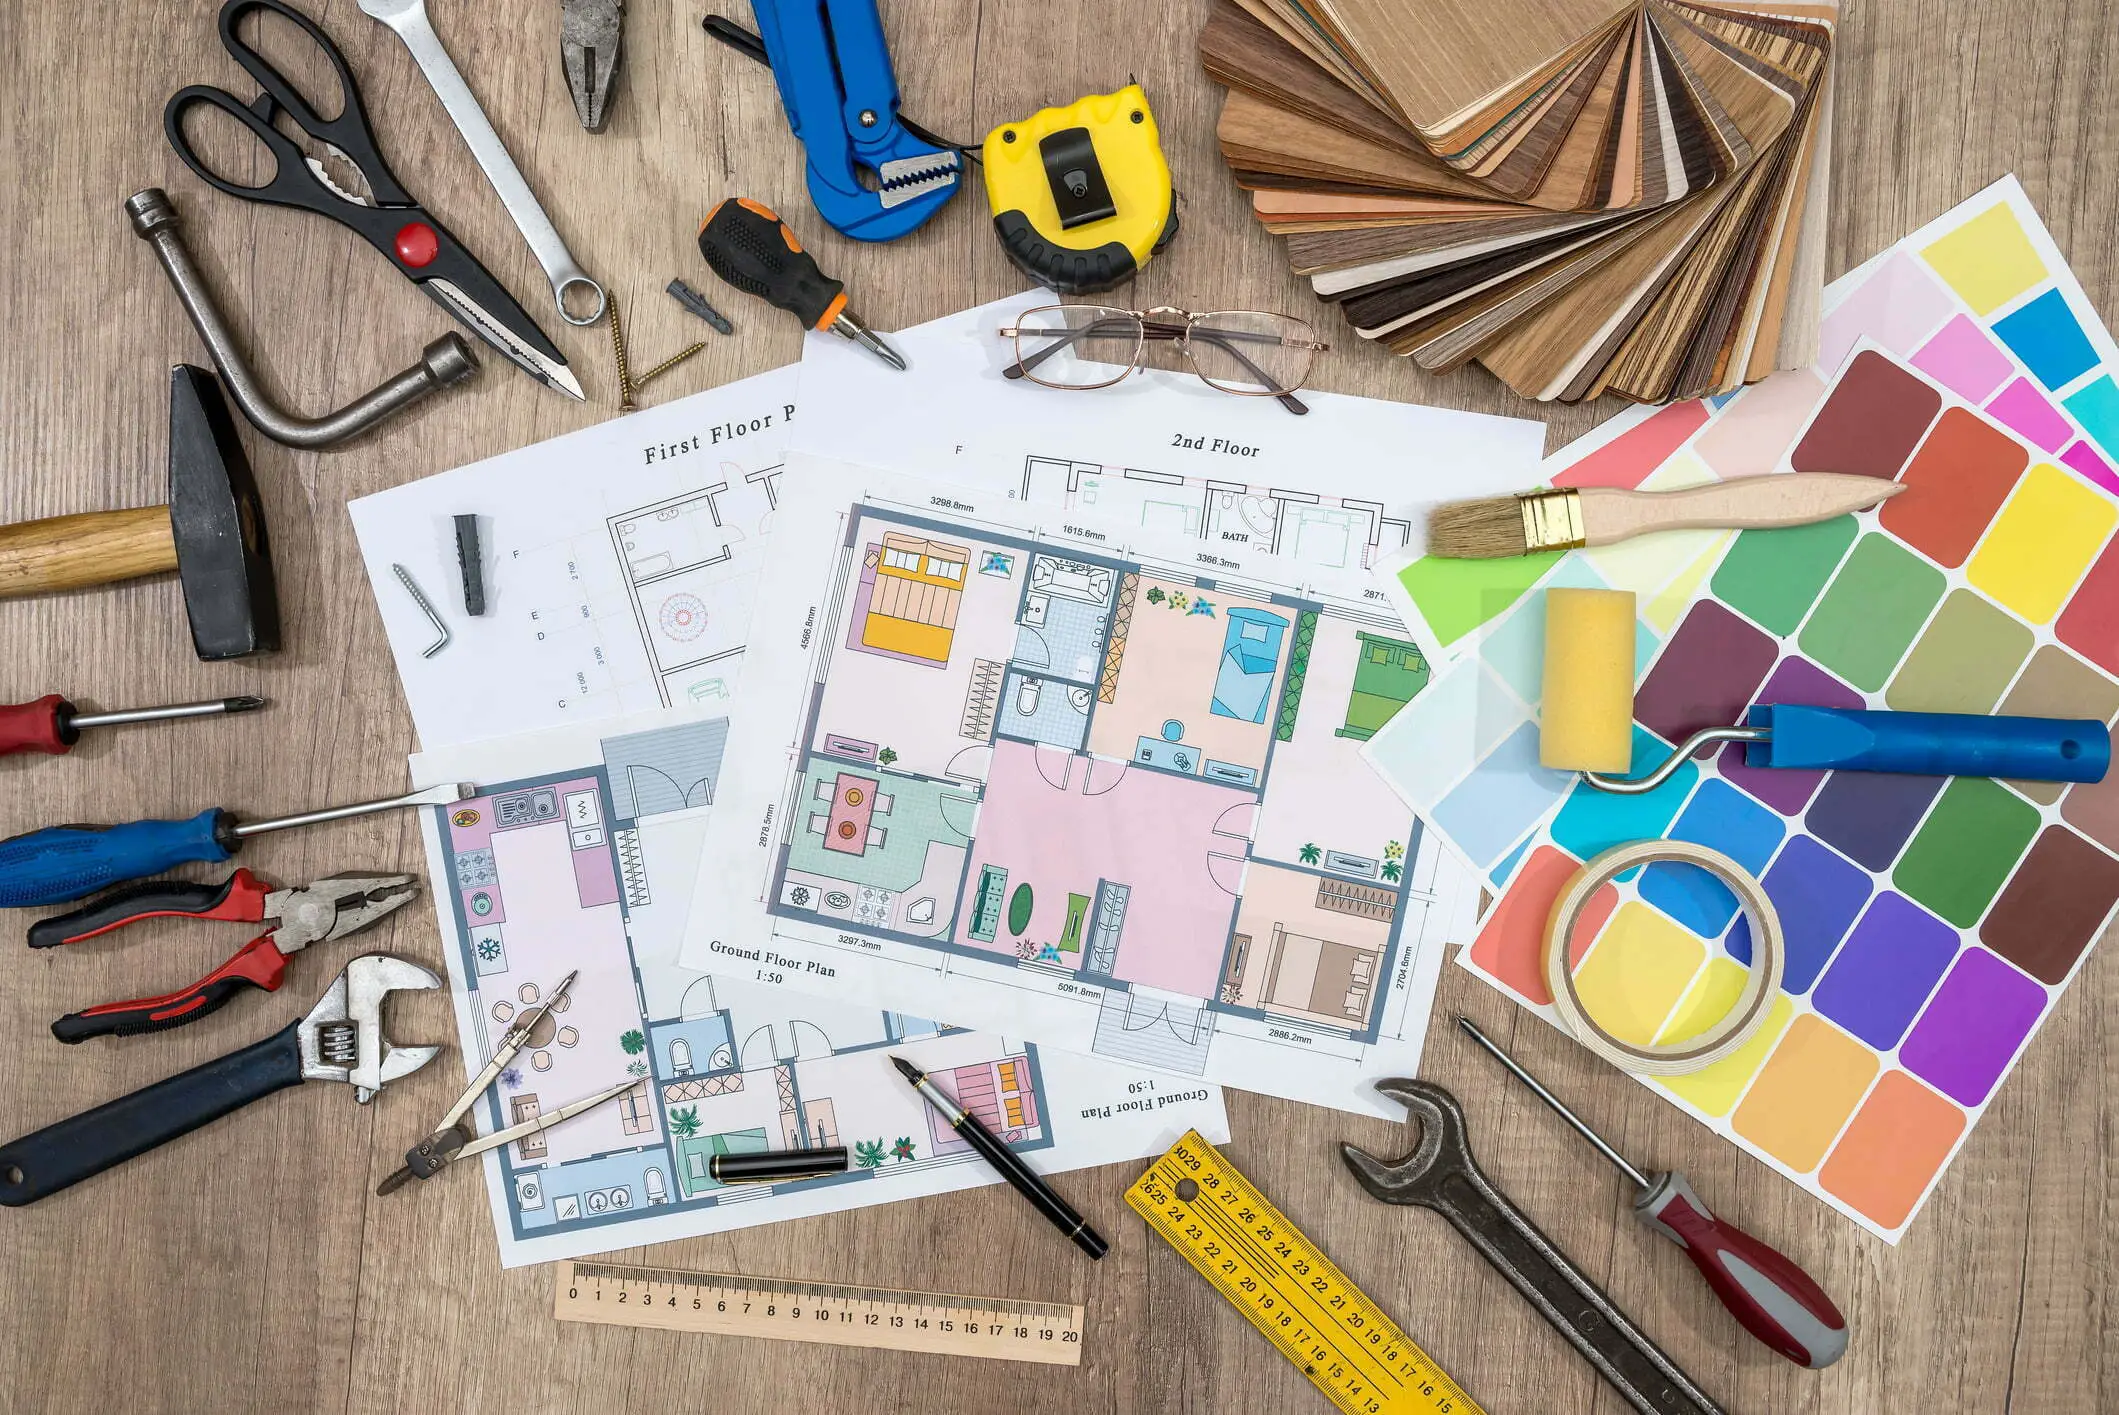 How to Set a Budget For Home Renovations